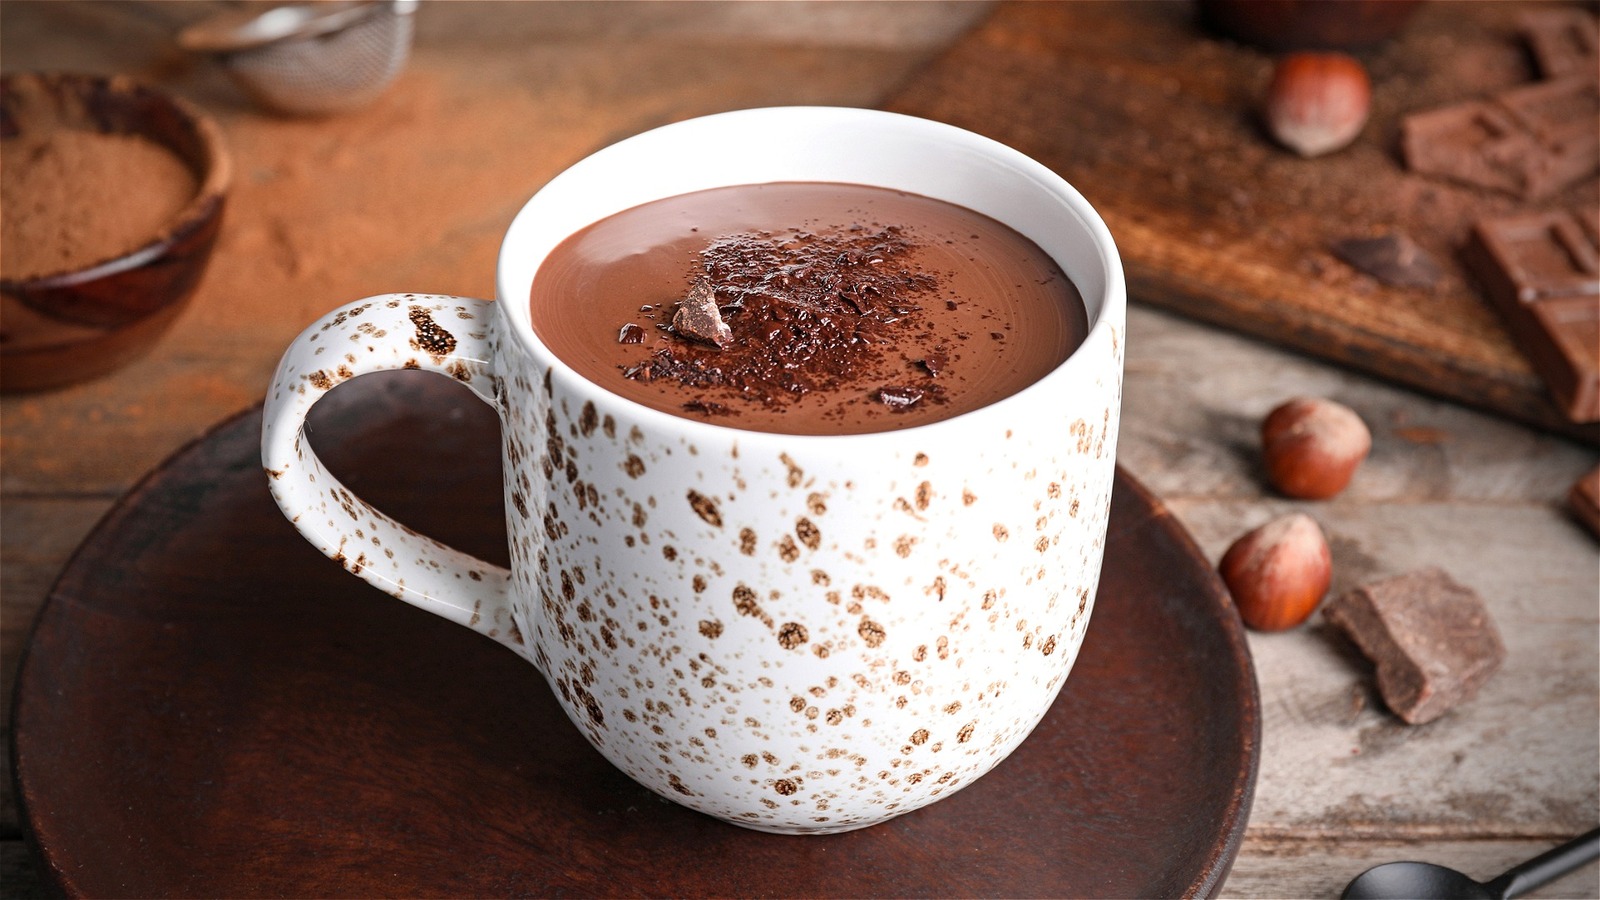 Image for article Bone Broth Is A Truly Unexpected Way To Upgrade Hot Chocolate  Daily Meal | Makemetechie.com Summary